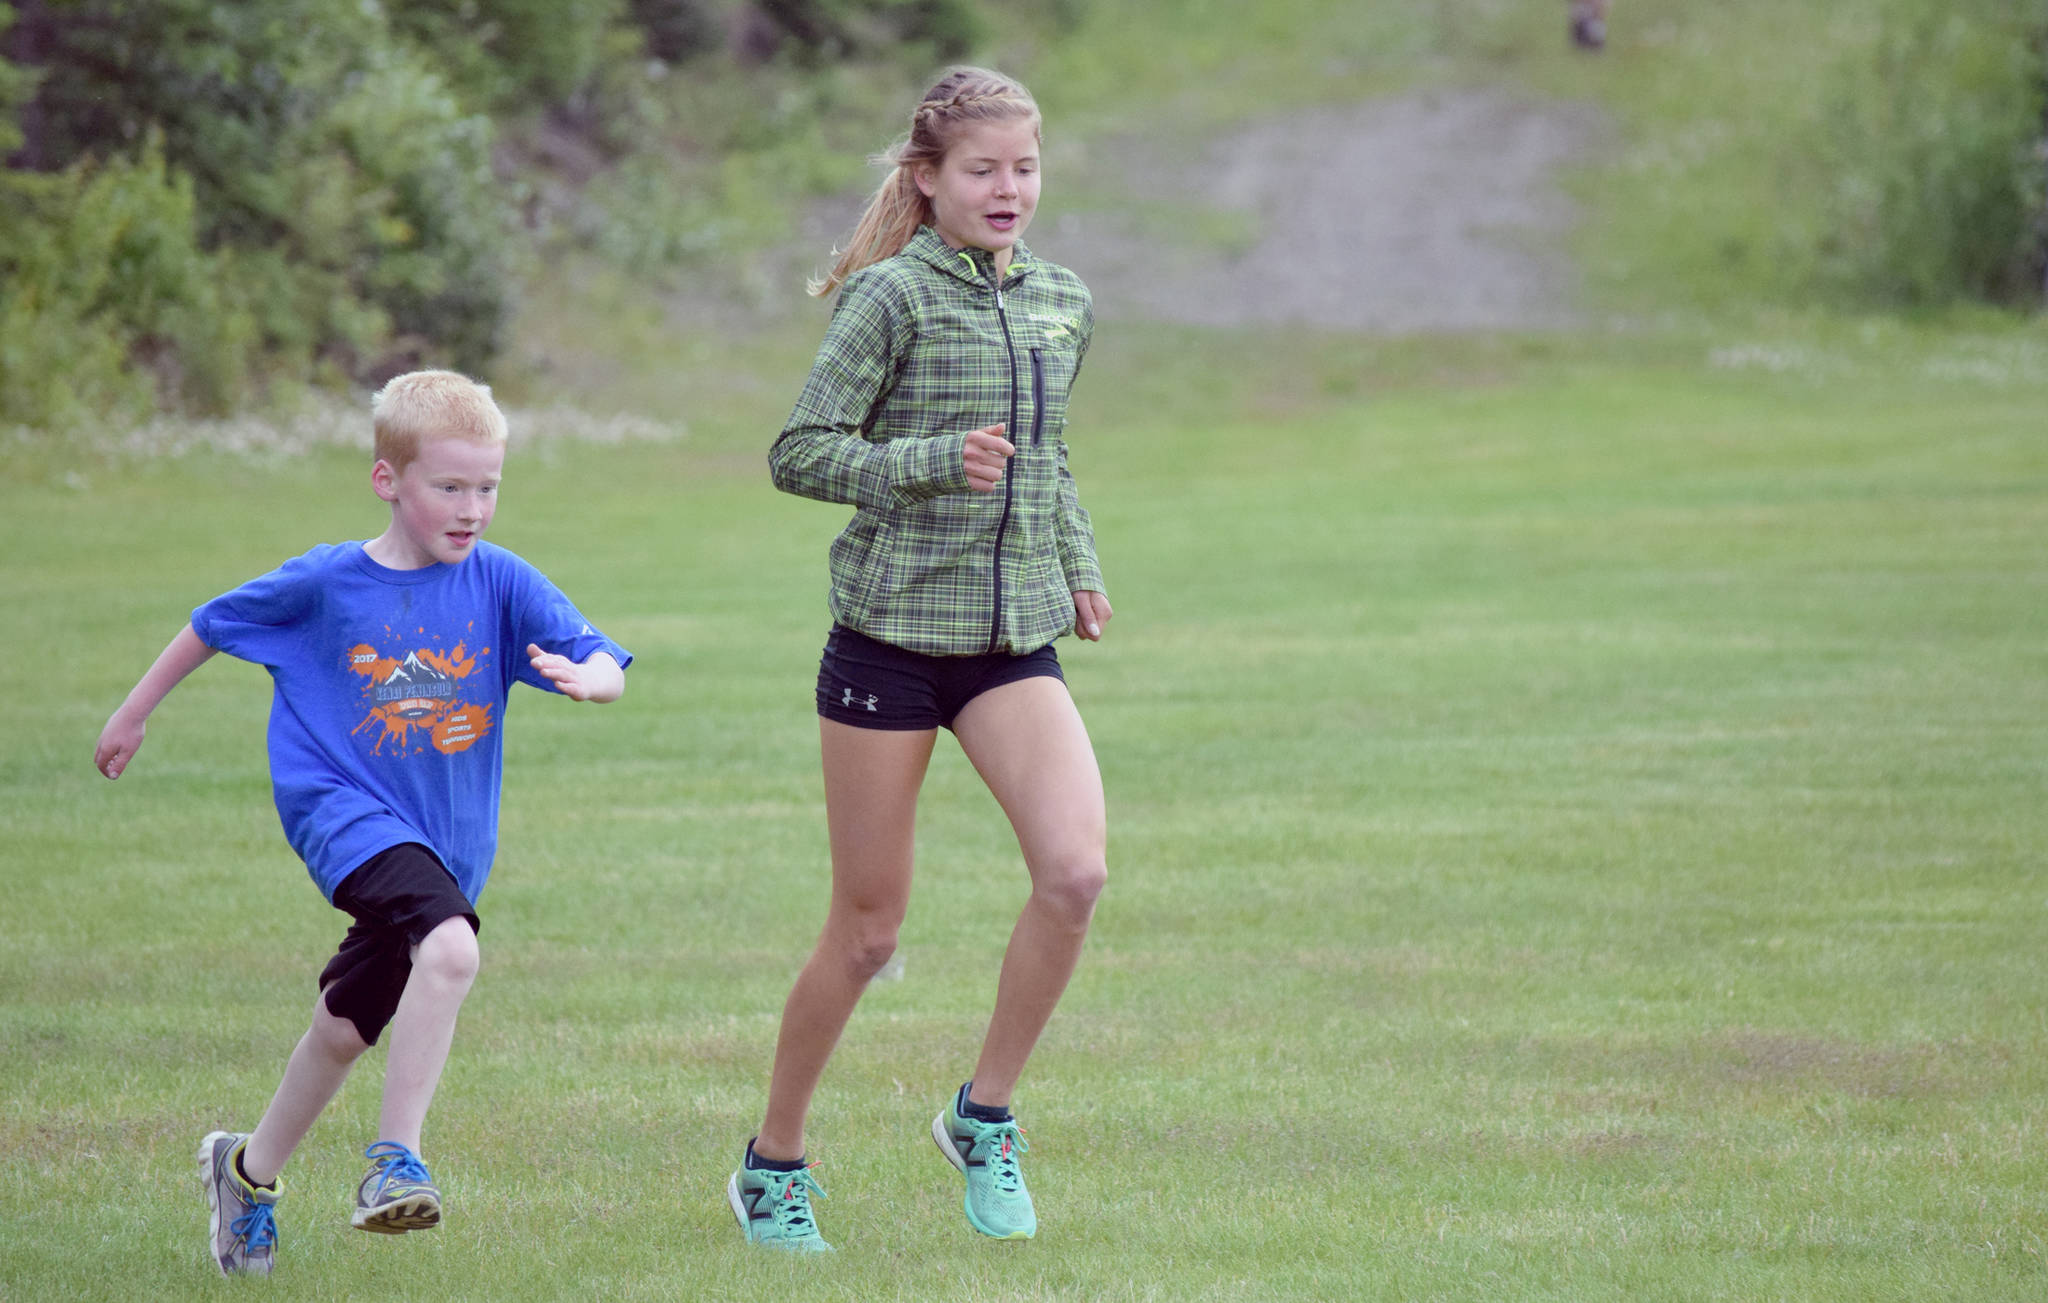 Allie Ostrander paces Joshua Lattin, 6, of Soldotna during the one-kilometer kids race at the Salmon Run Series at Tsalteshi Trails in Soldotna on Wednesday, July 19, 2017. (Photo by Jeff Helminiak/Peninsula Clarion)